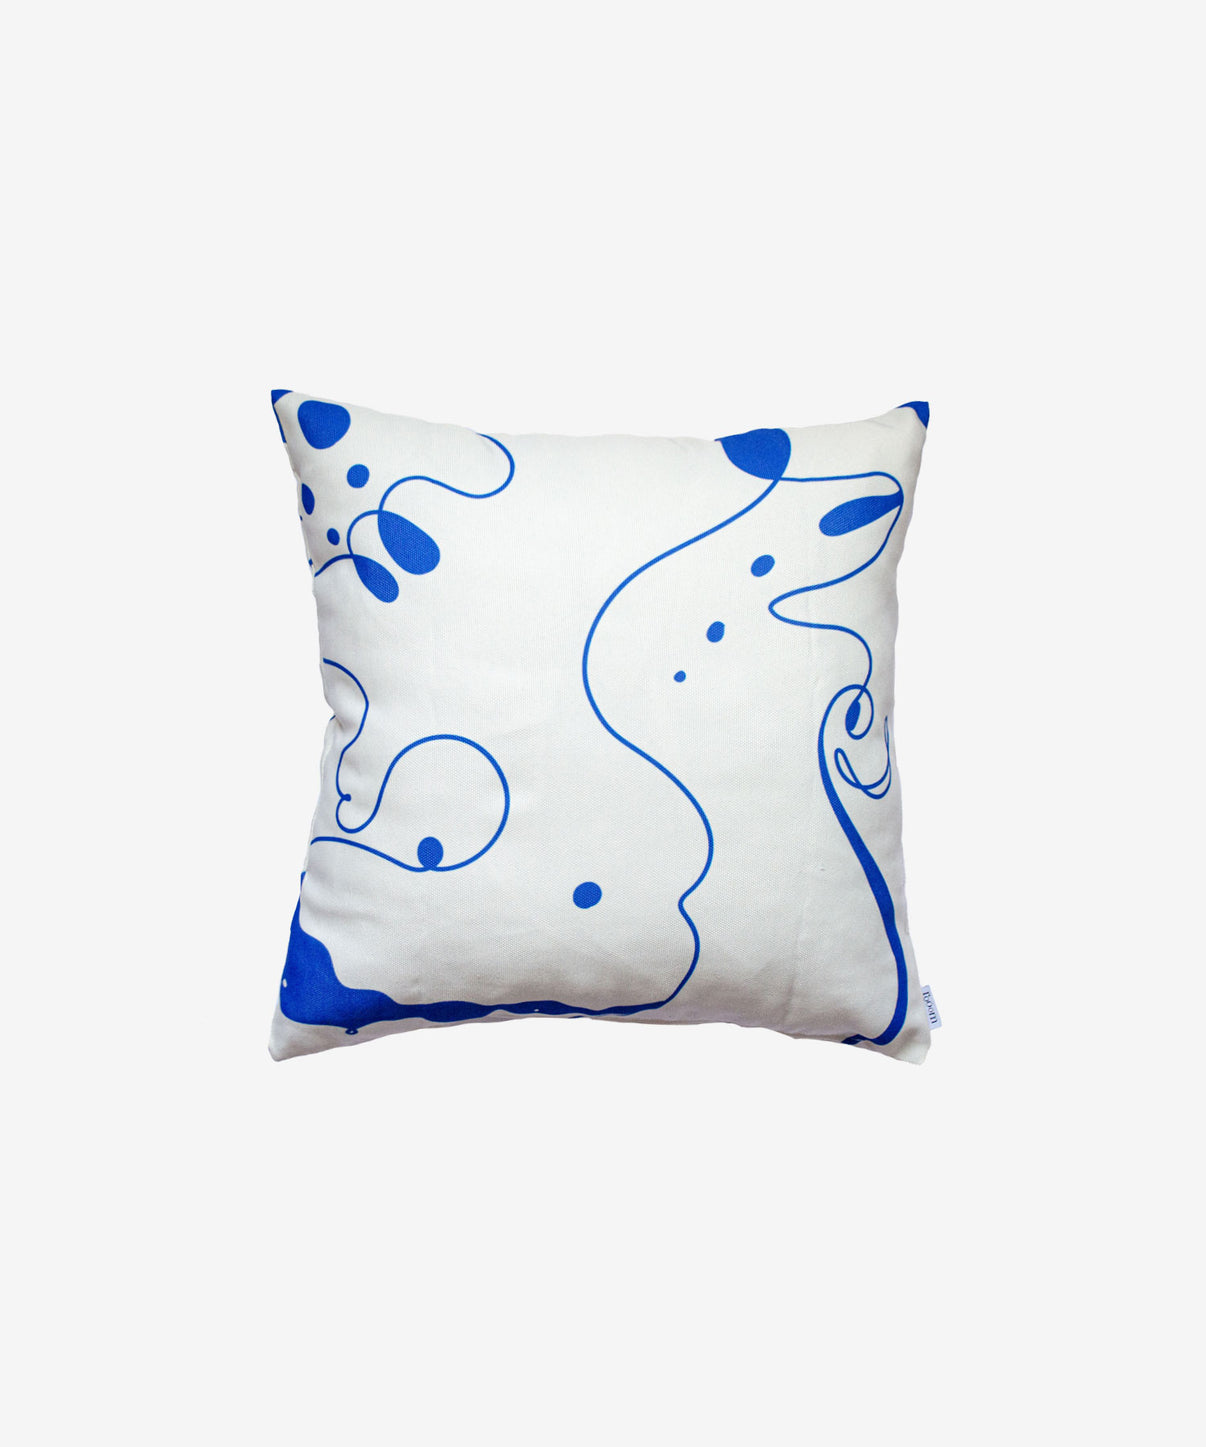 Rooom - Caras recycled pillowcase